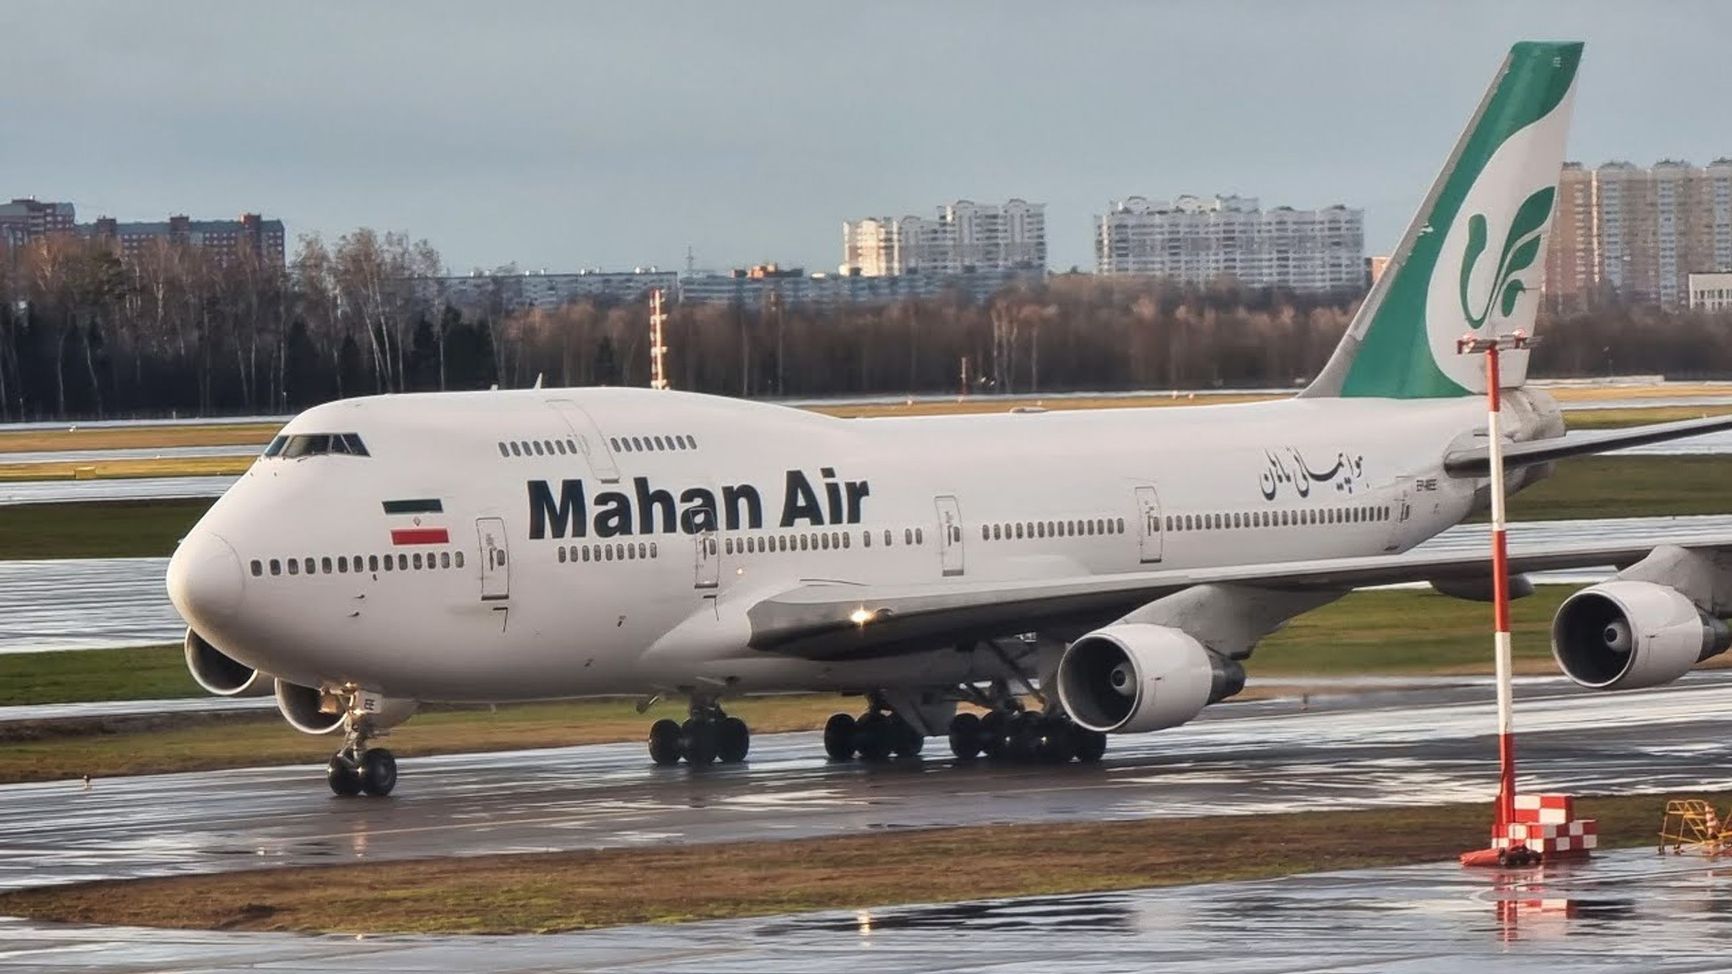 Mahan Air's Boeing 747-400 flying on the Moscow - Tehran route